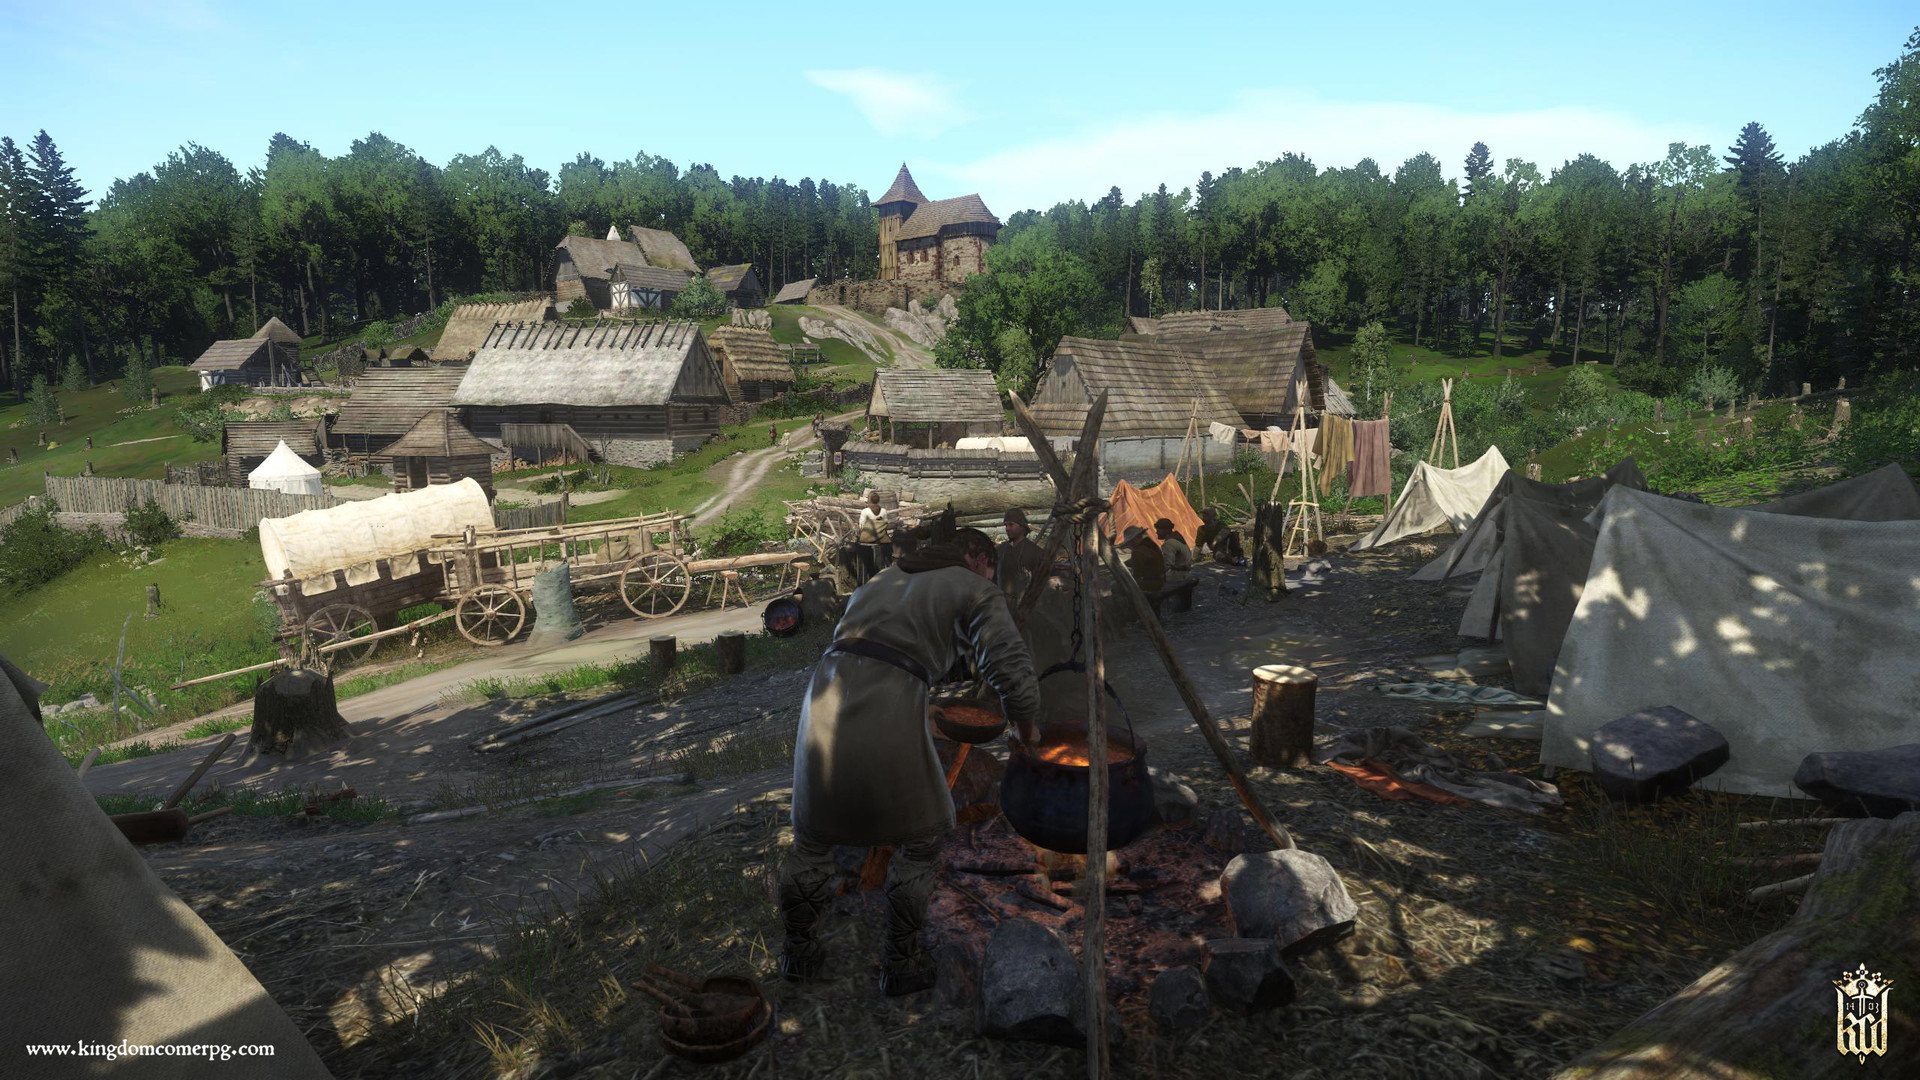 Kingdom Come: Deliverance - From The Ashes DLC EU Steam CD Key